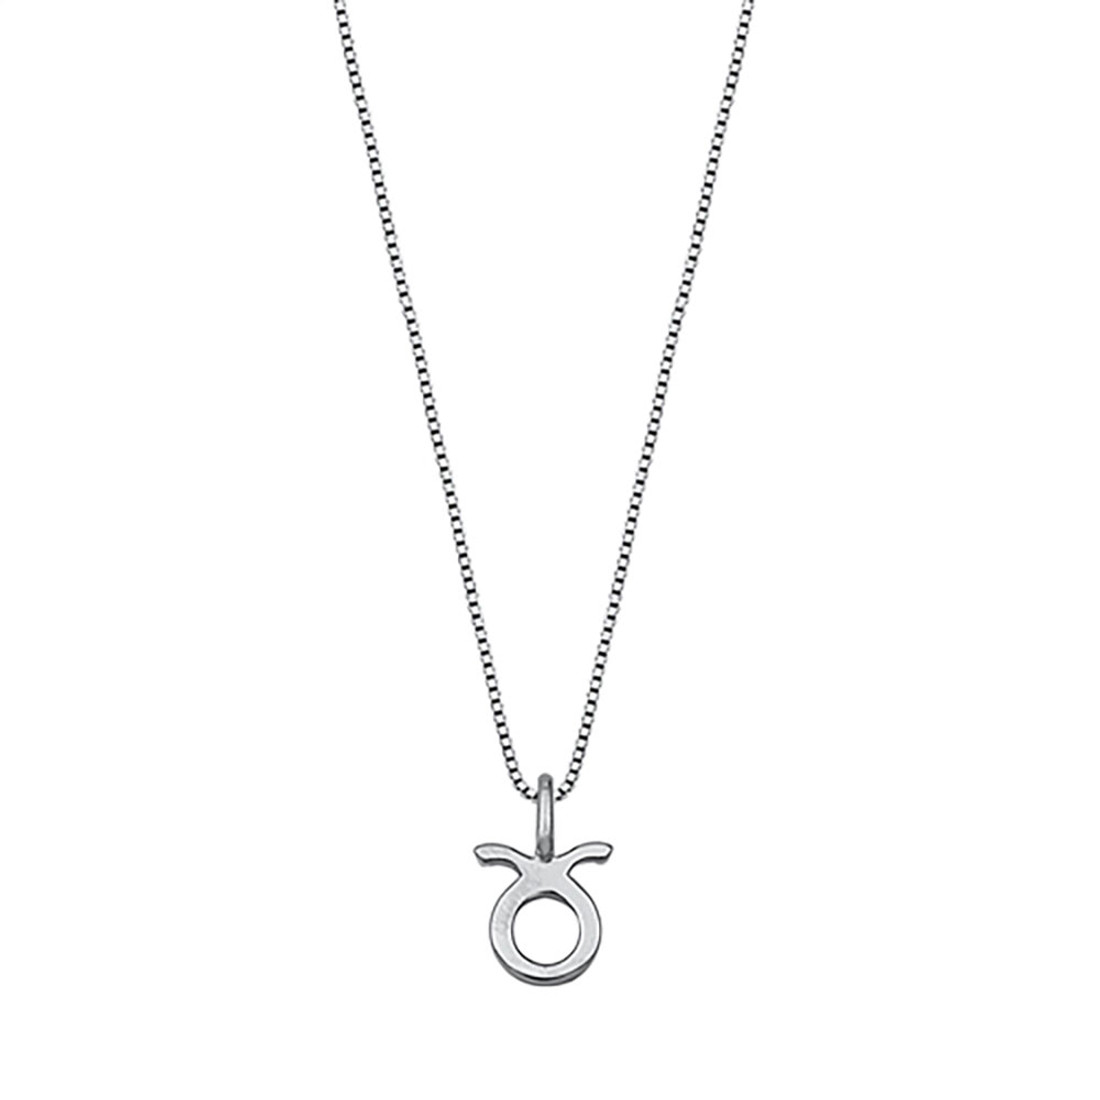 Sterling silver Taurus pendant and chain necklace. 